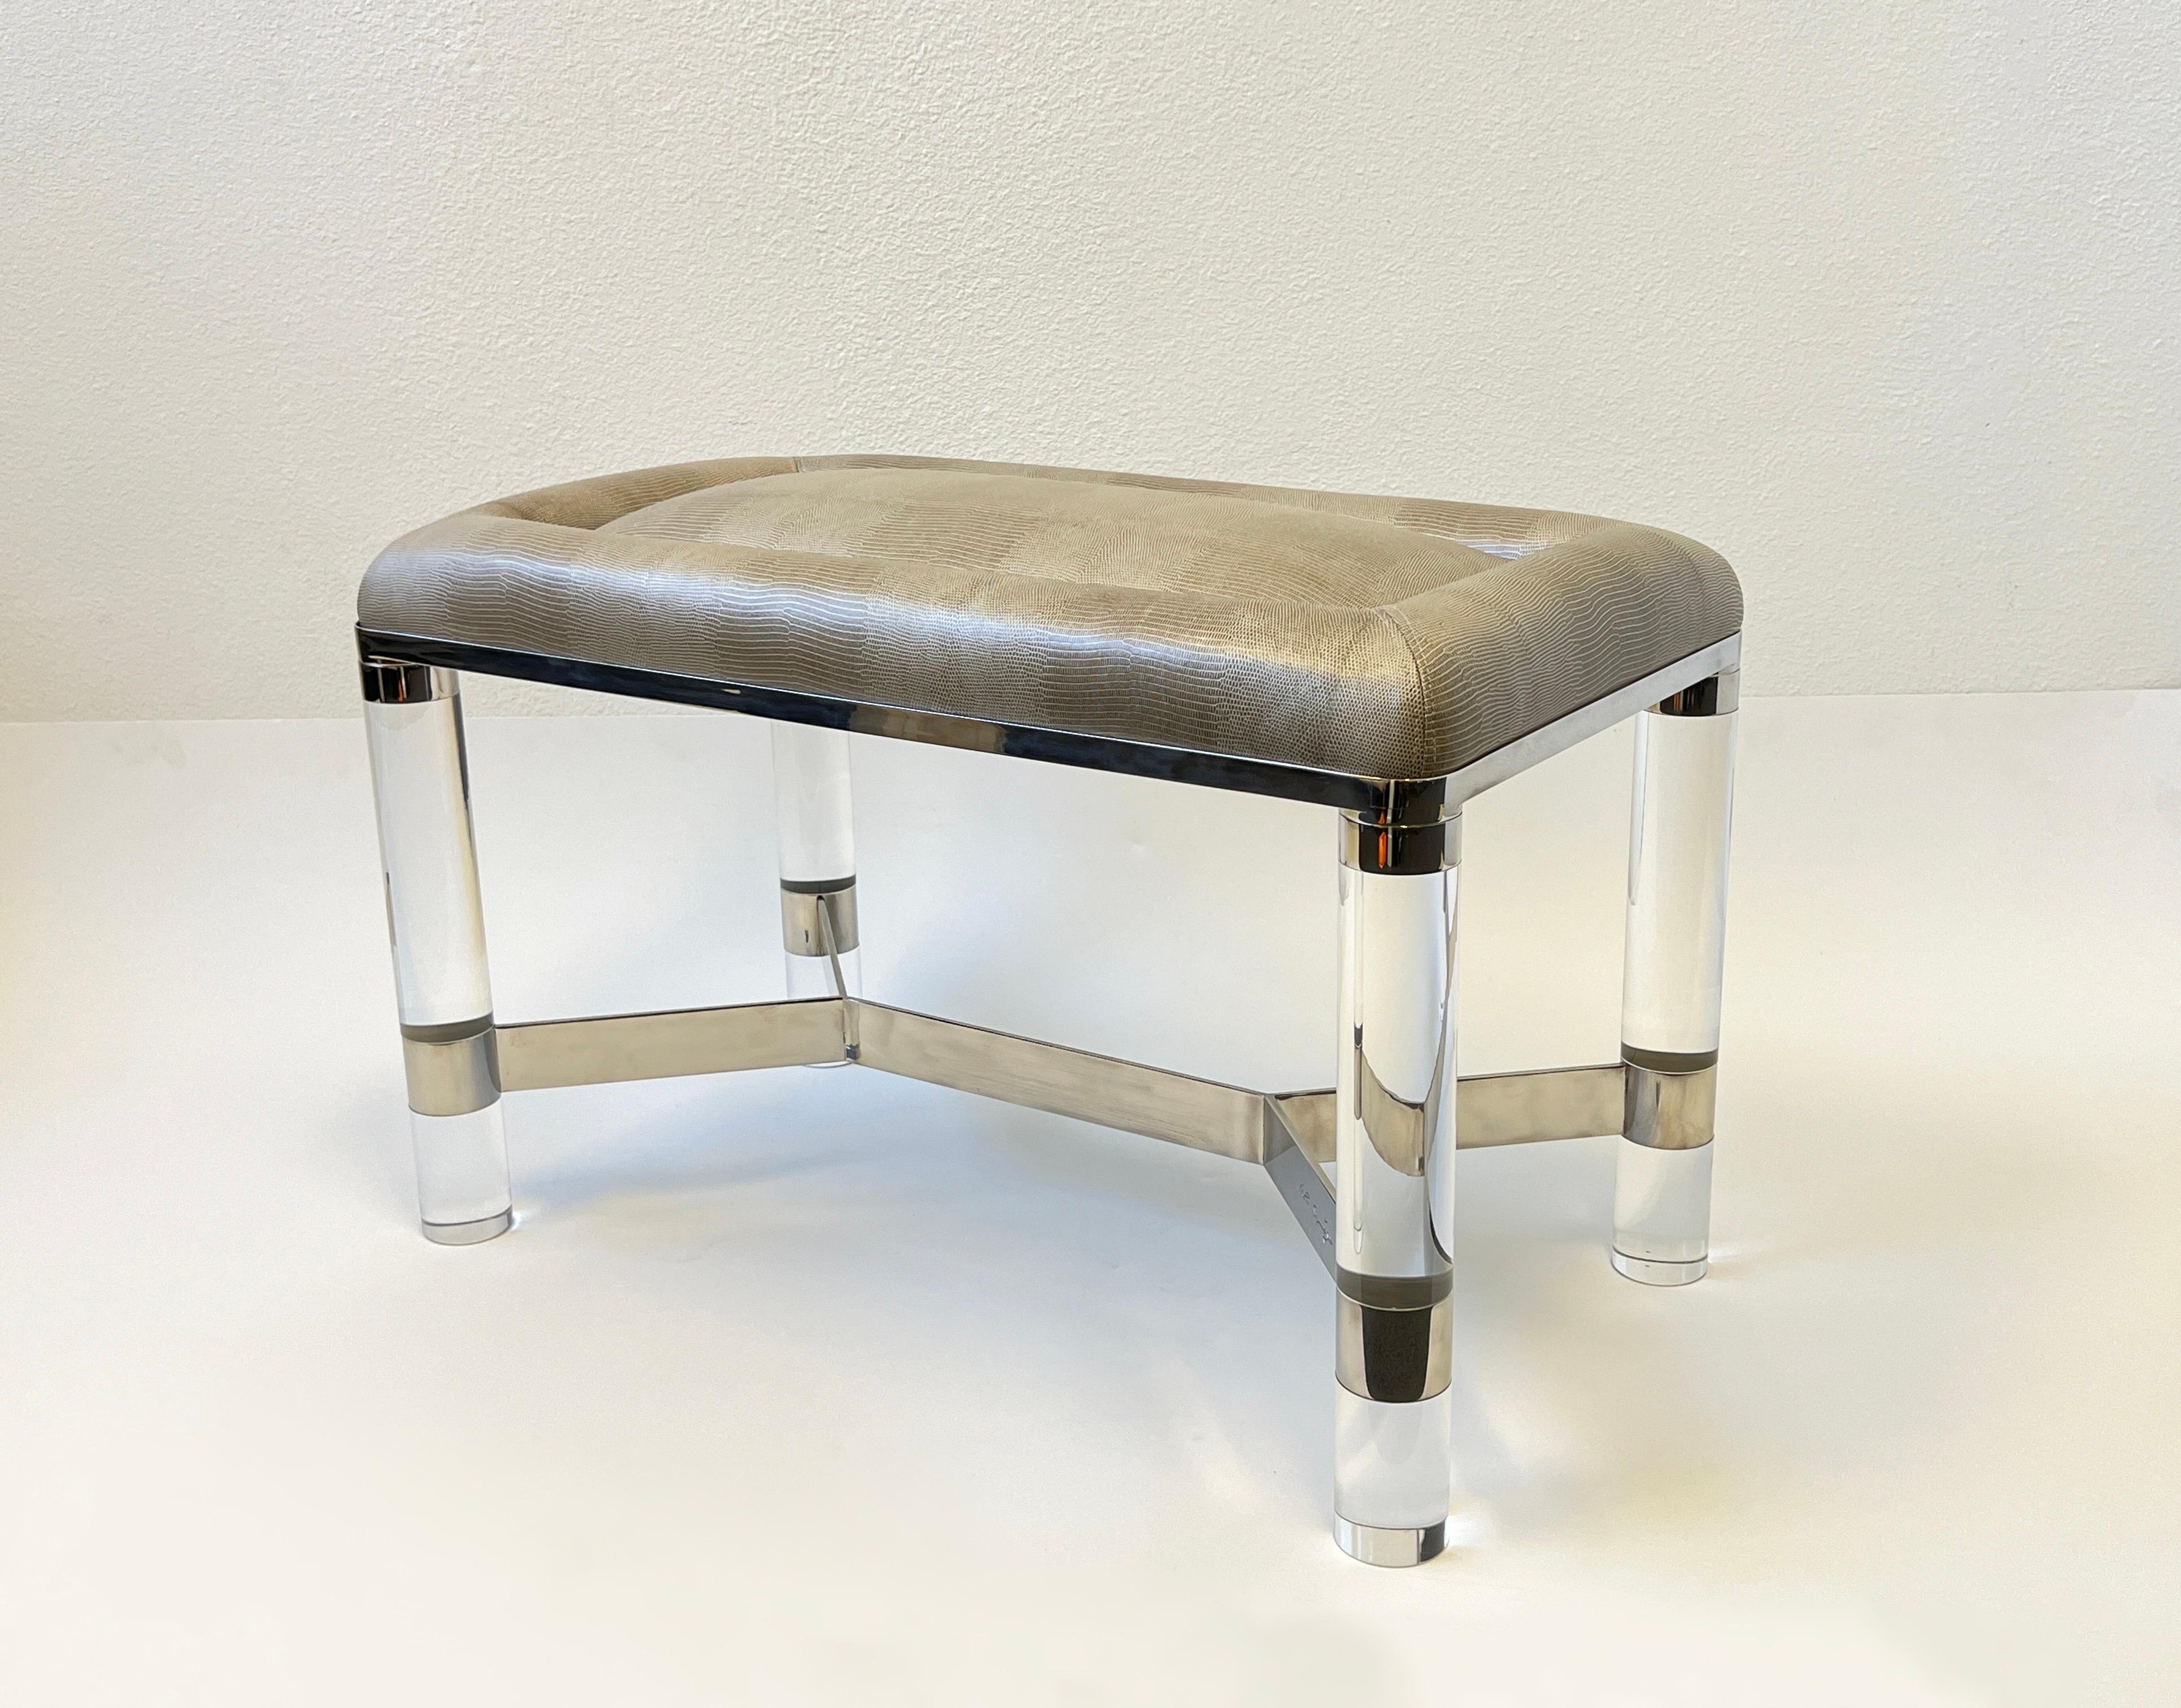 Glamorous 1980’s clear acrylic and polish chrome with Italian snakeskin embossed leather bench 
By renowned designer Karl Springer (1931 - 1991). 
Newly recovered. 
The bench has the signature stamped on the base. 
In beautiful vintage condition